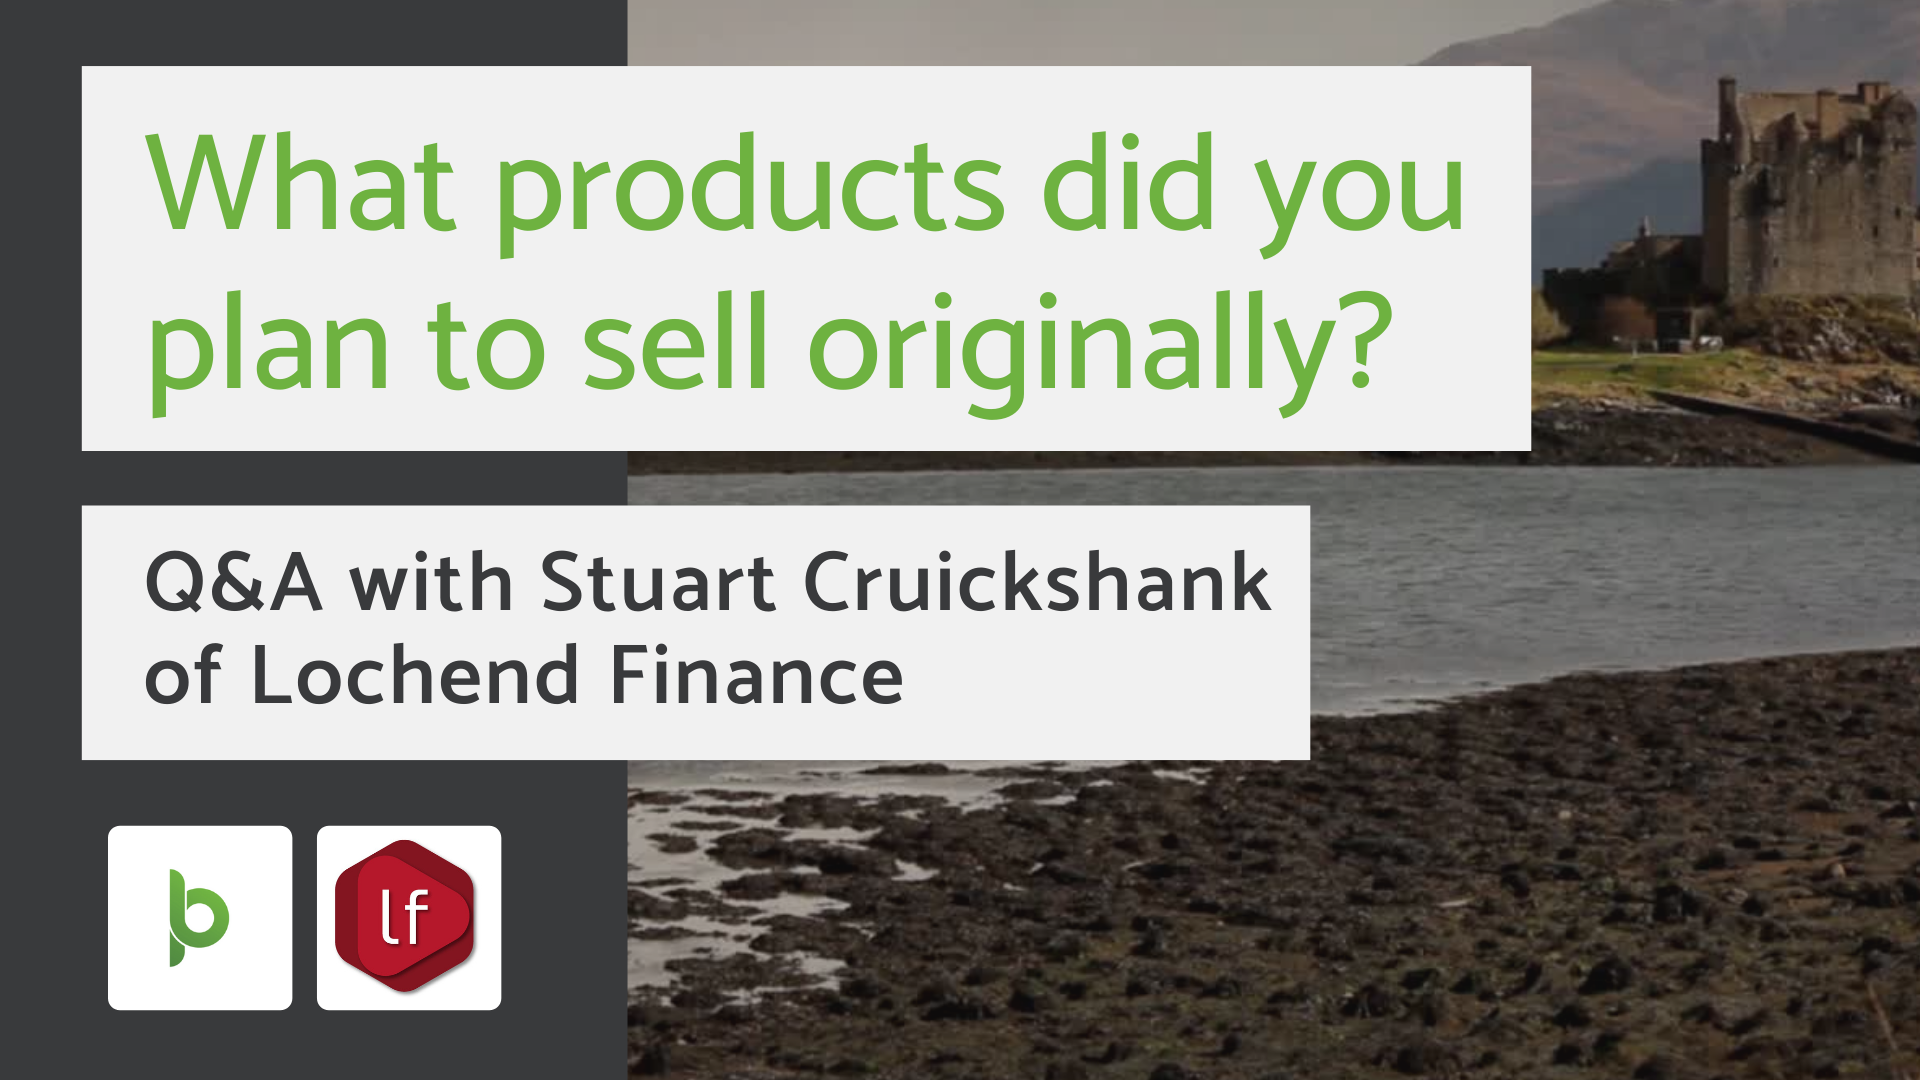 Q&A with Stuart Cruickshank | What Products did you Plan to Sell Originally?